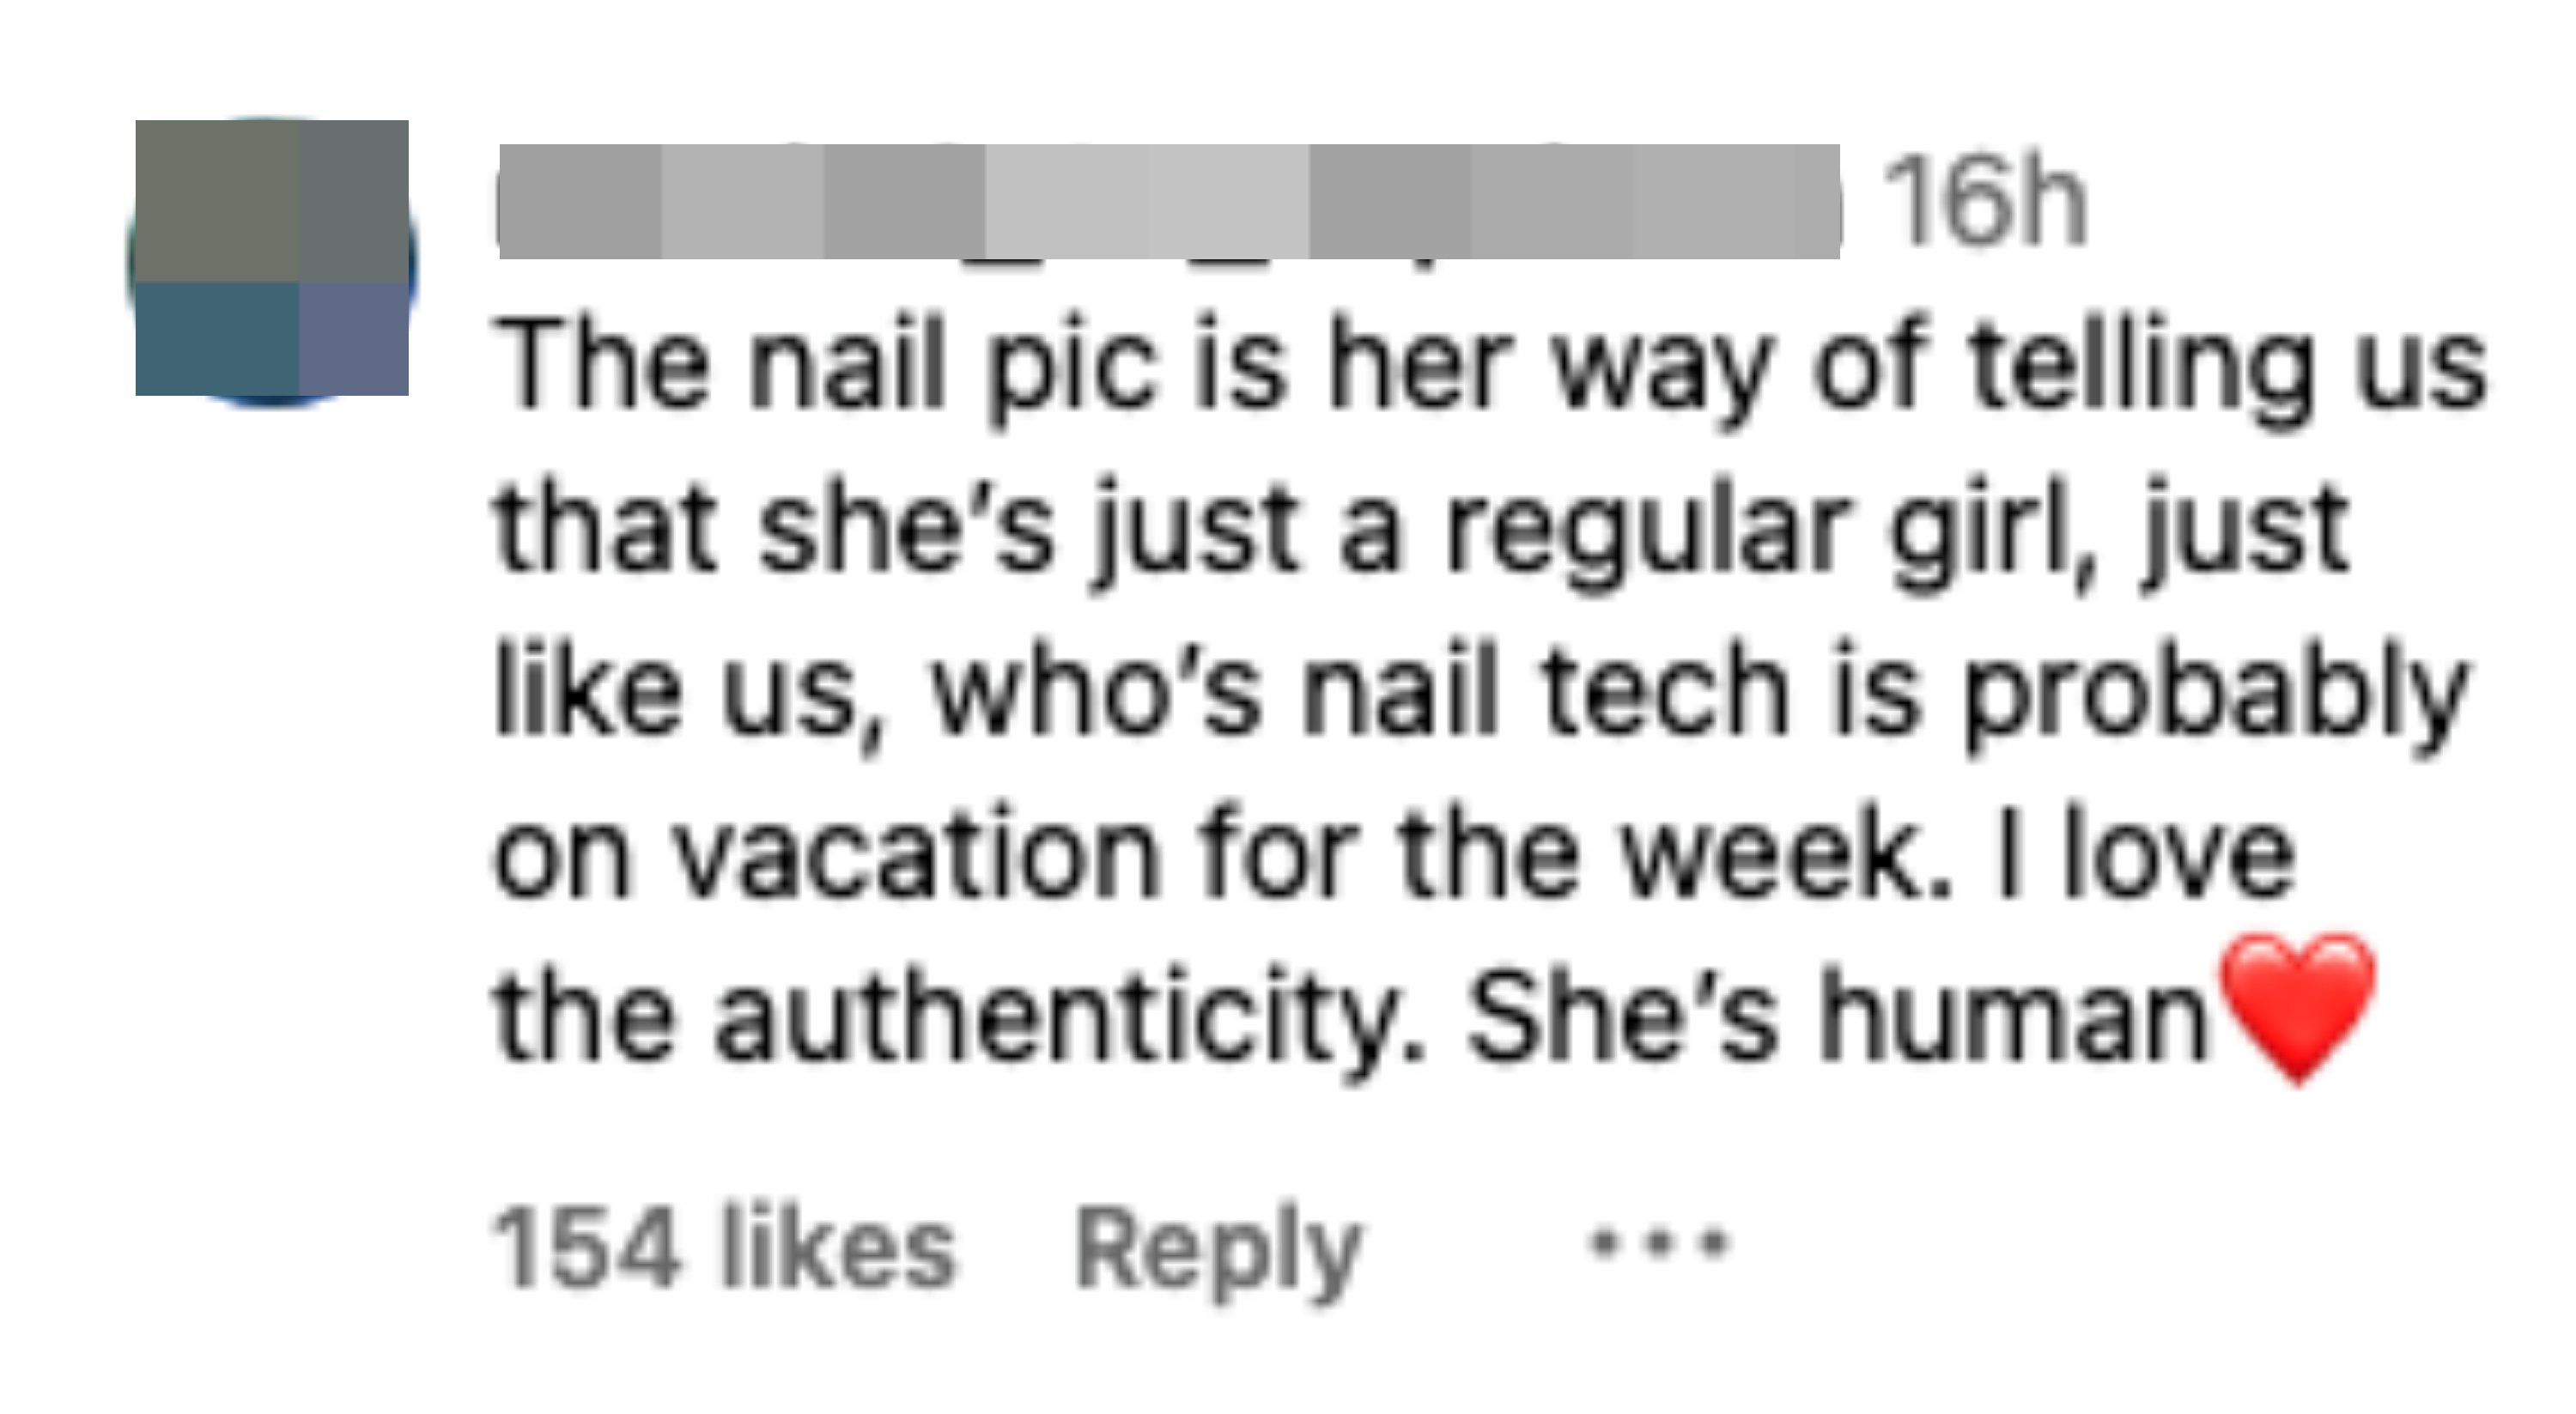 The nail pic is her way is her telling us she’s just a regular girl